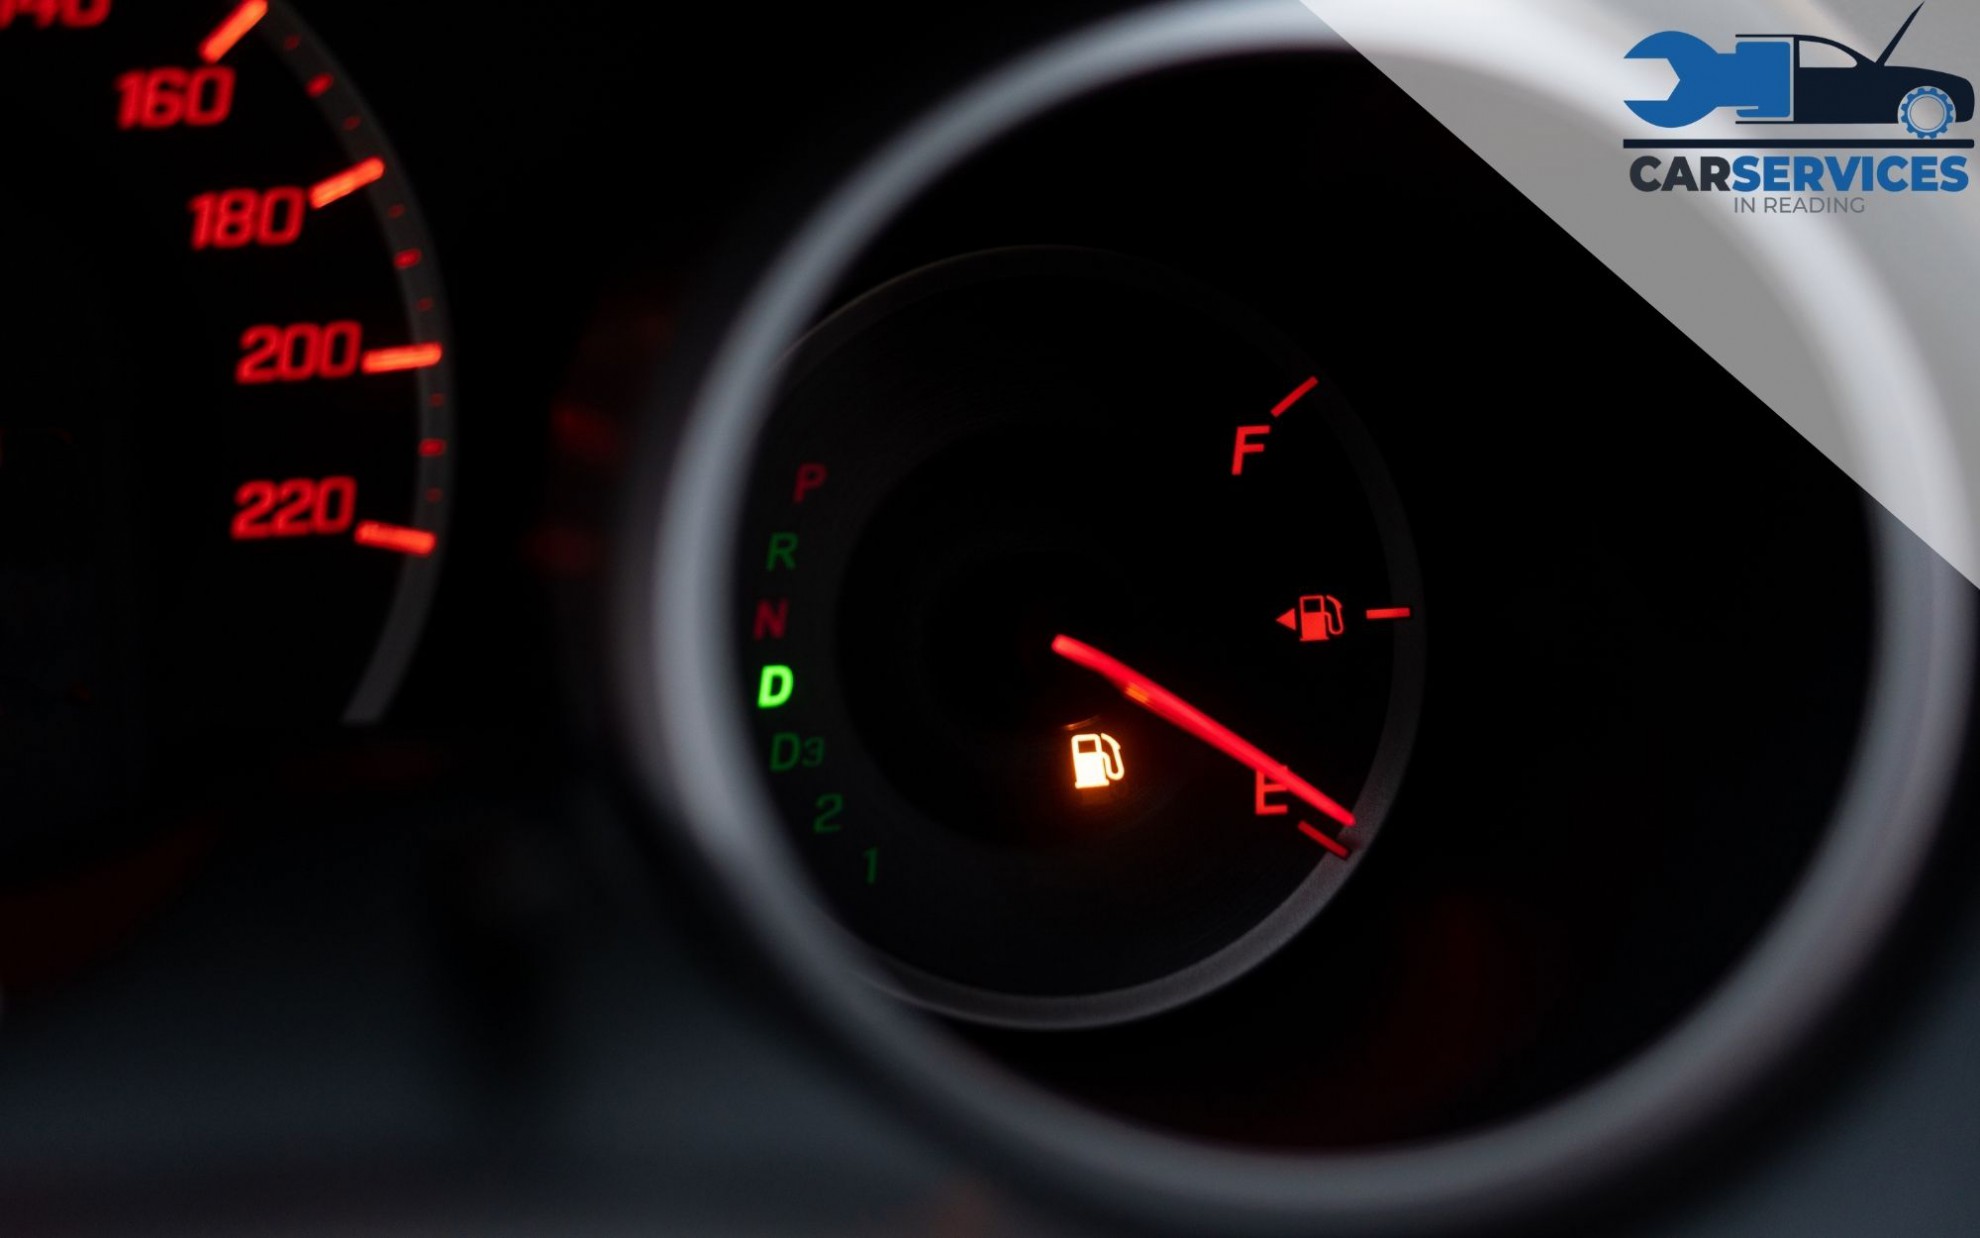 When Your Brake Warning Light Turns On, What Should You Do?